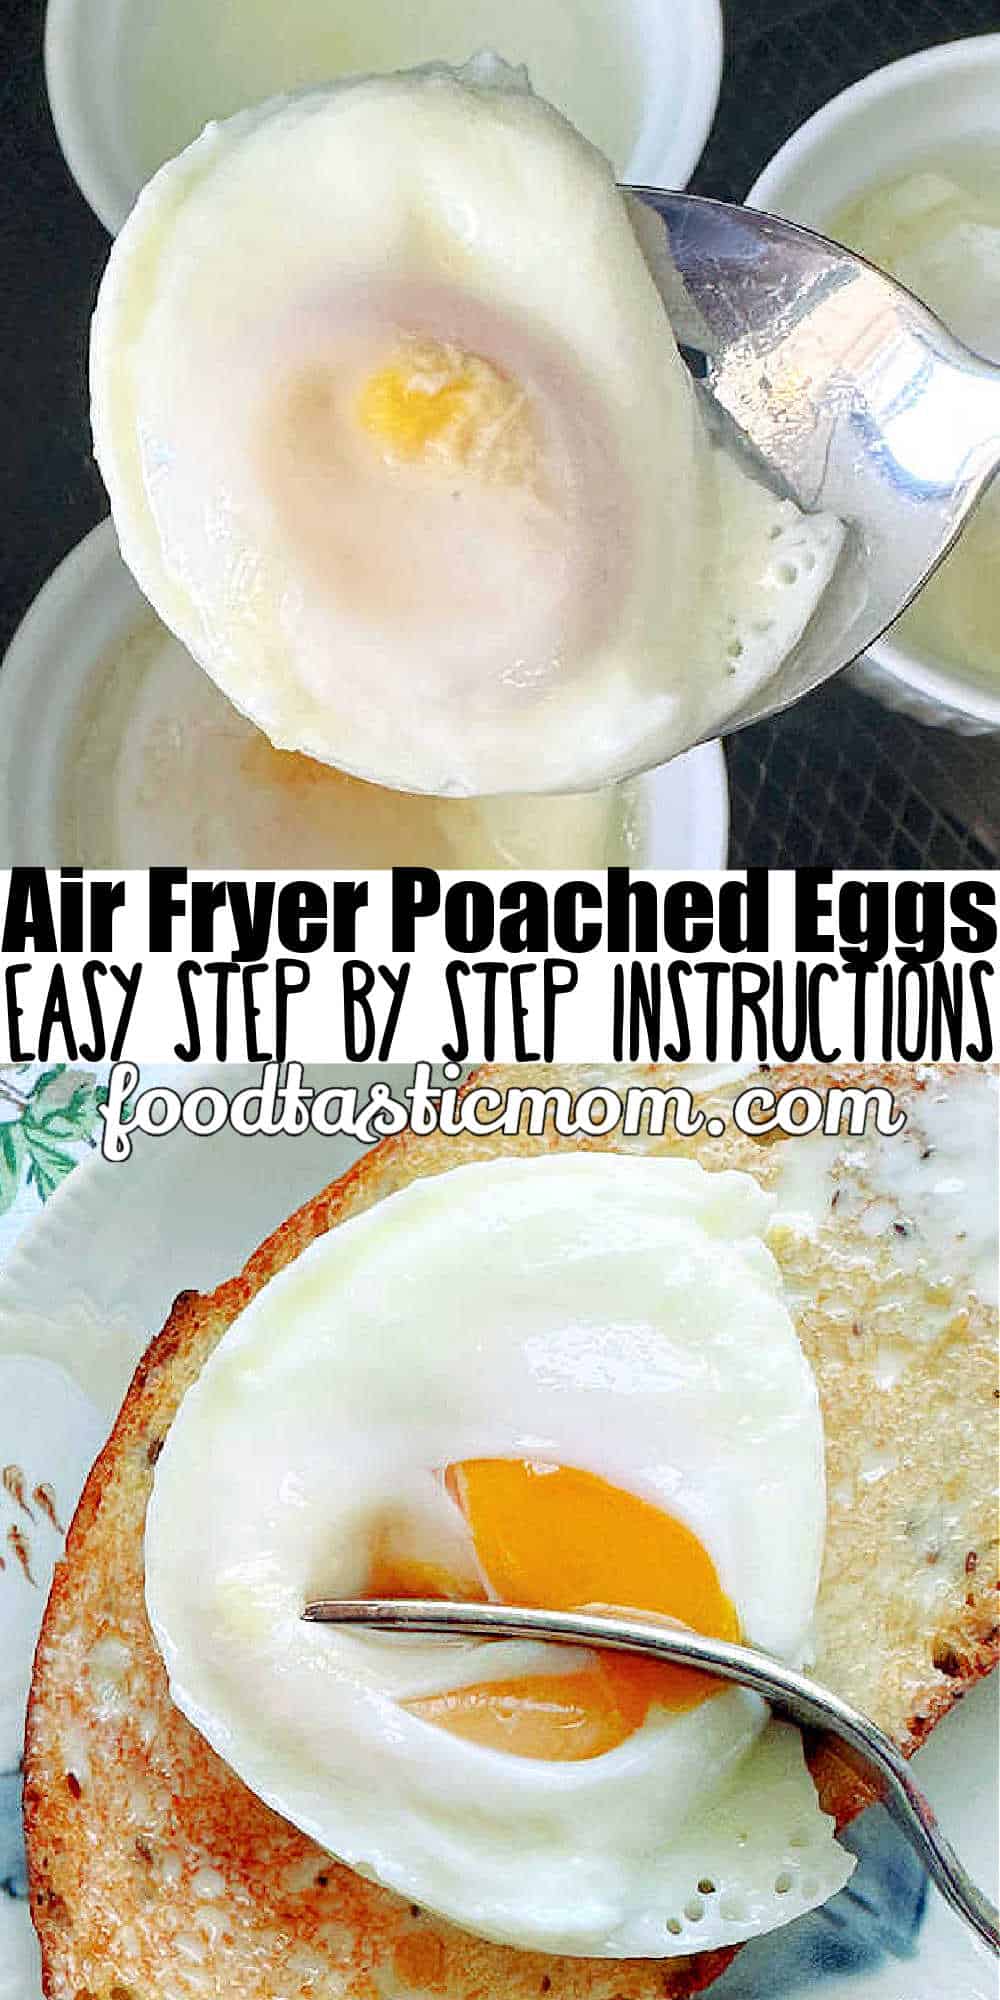 Air Fryer Poached Eggs - Daily Yum